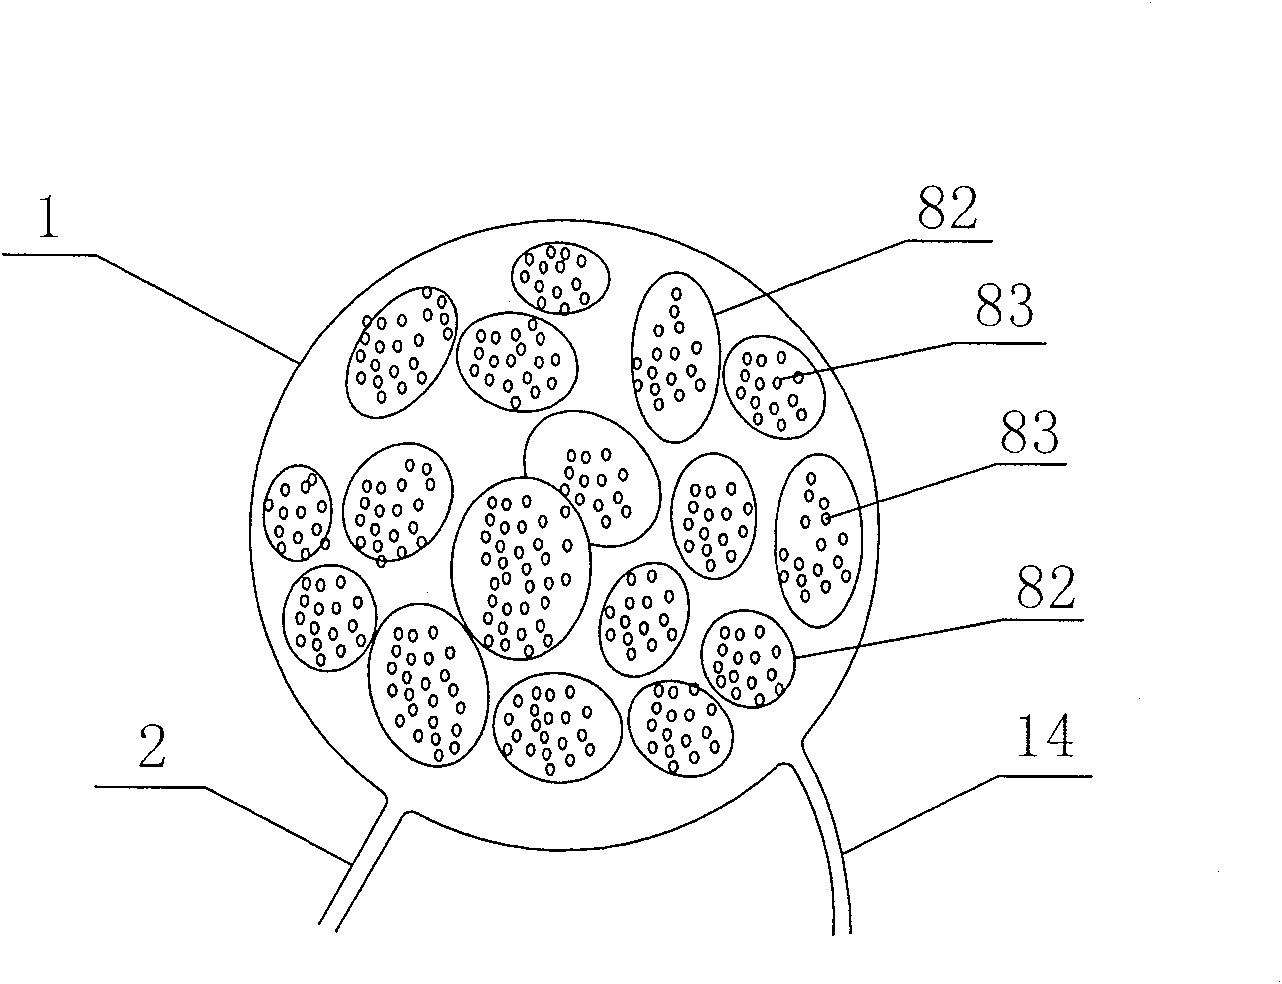 Automatic expanding device for implantation in human body